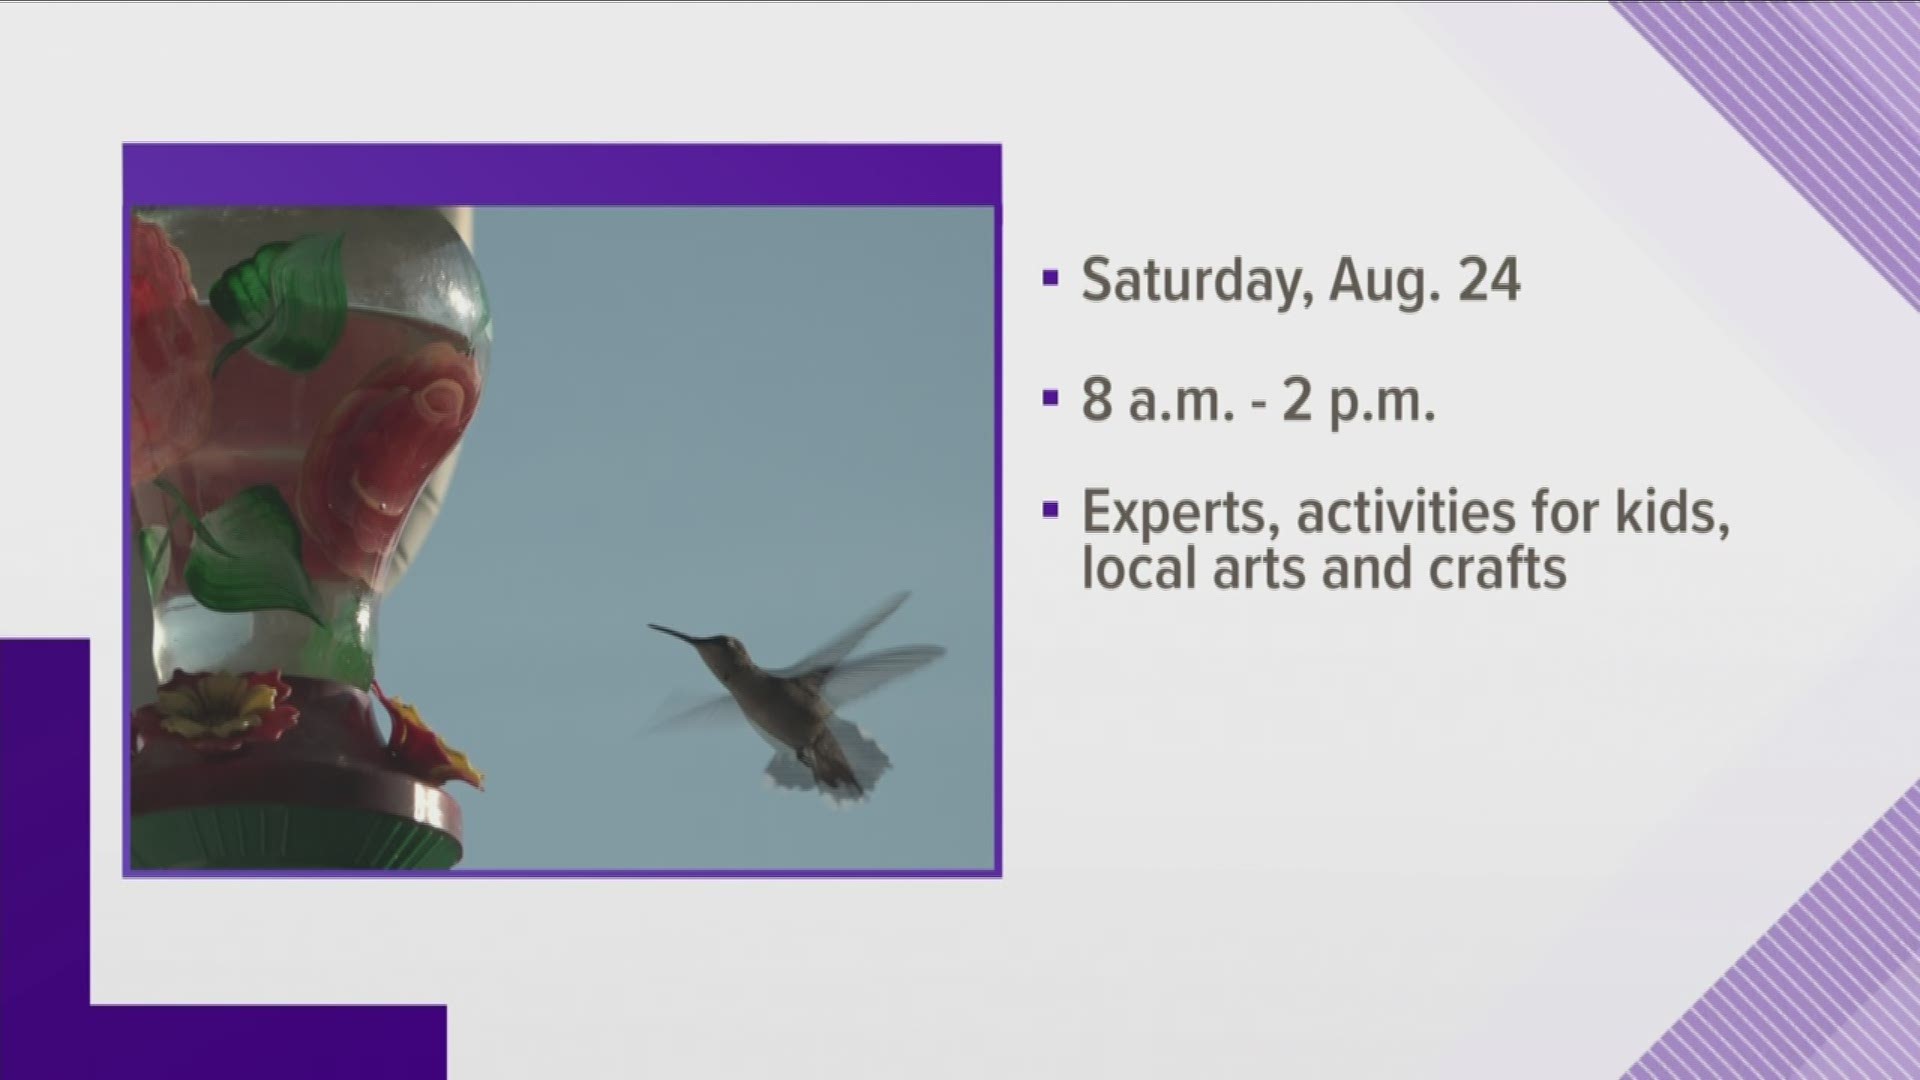 Ijams Nature Center is celebrating hummingbirds at a festival on August 24